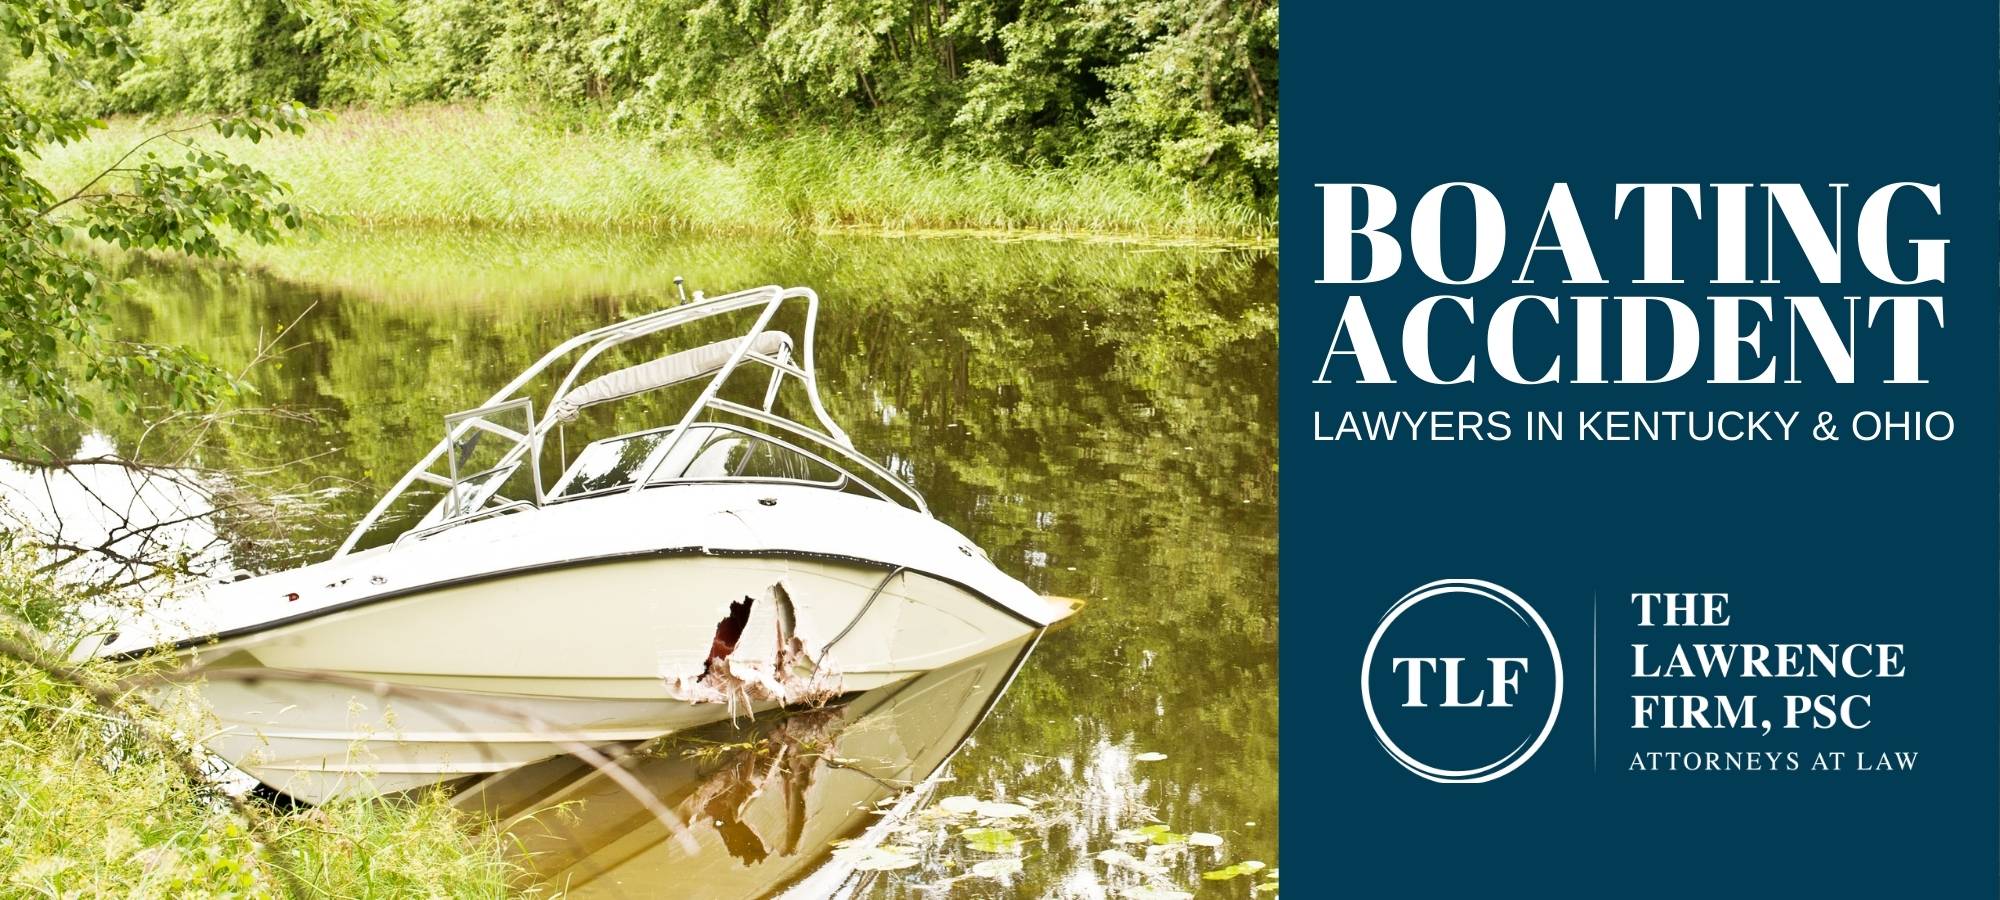 boating accident lawyer in kentucky